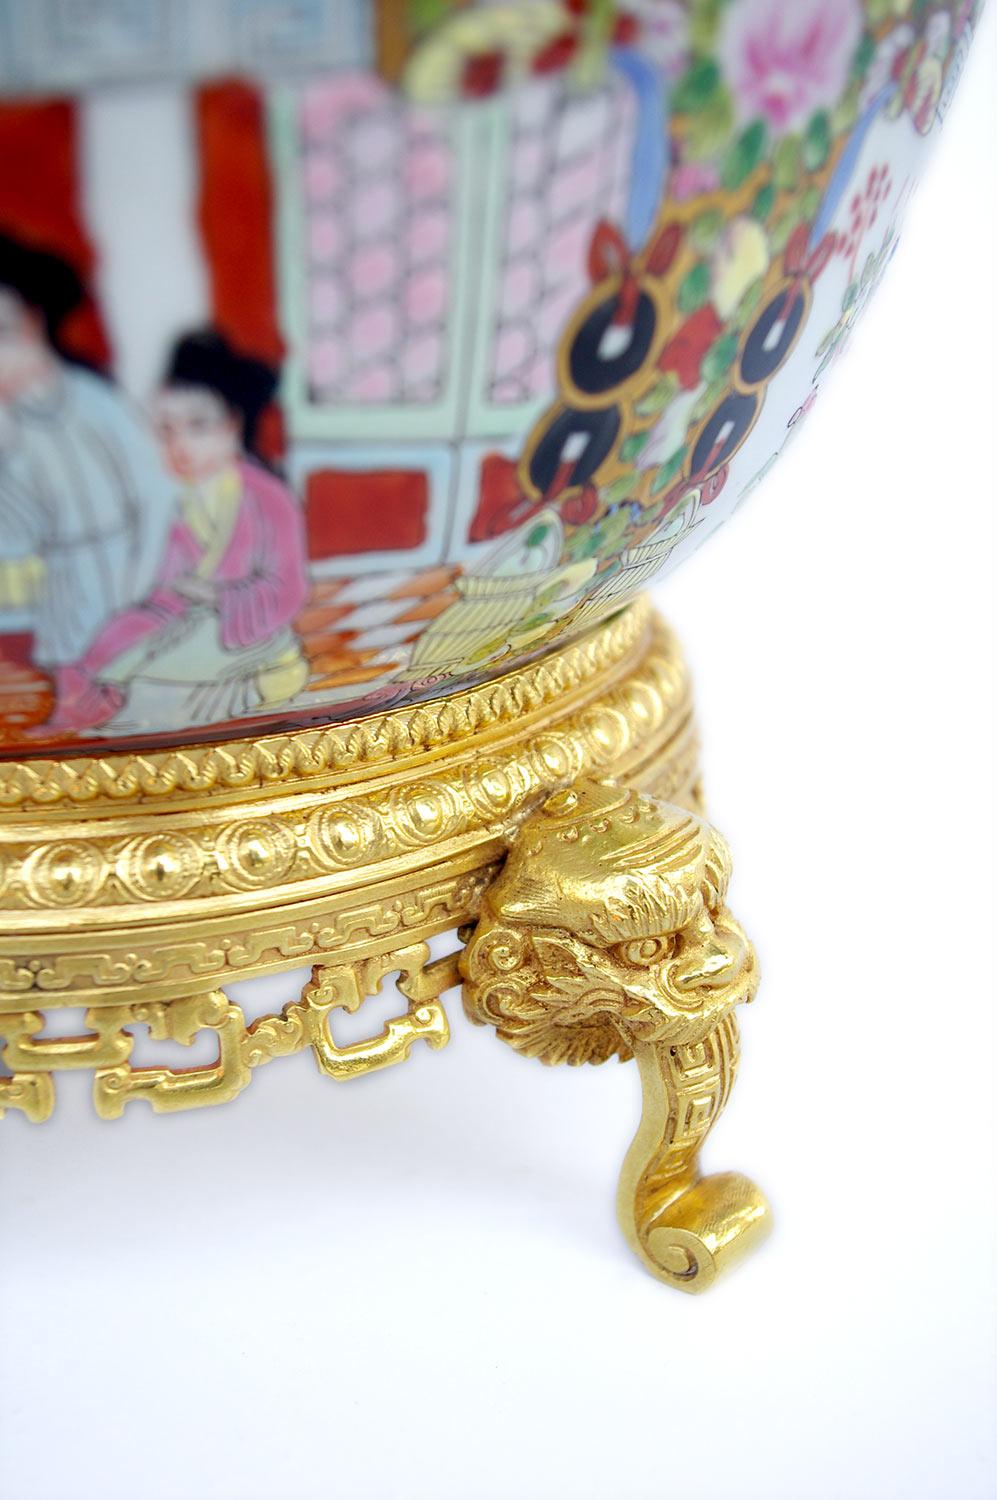 Chinese Canton Porcelain Punch Bowl Standing on Chiseled Gilt, circa 1880